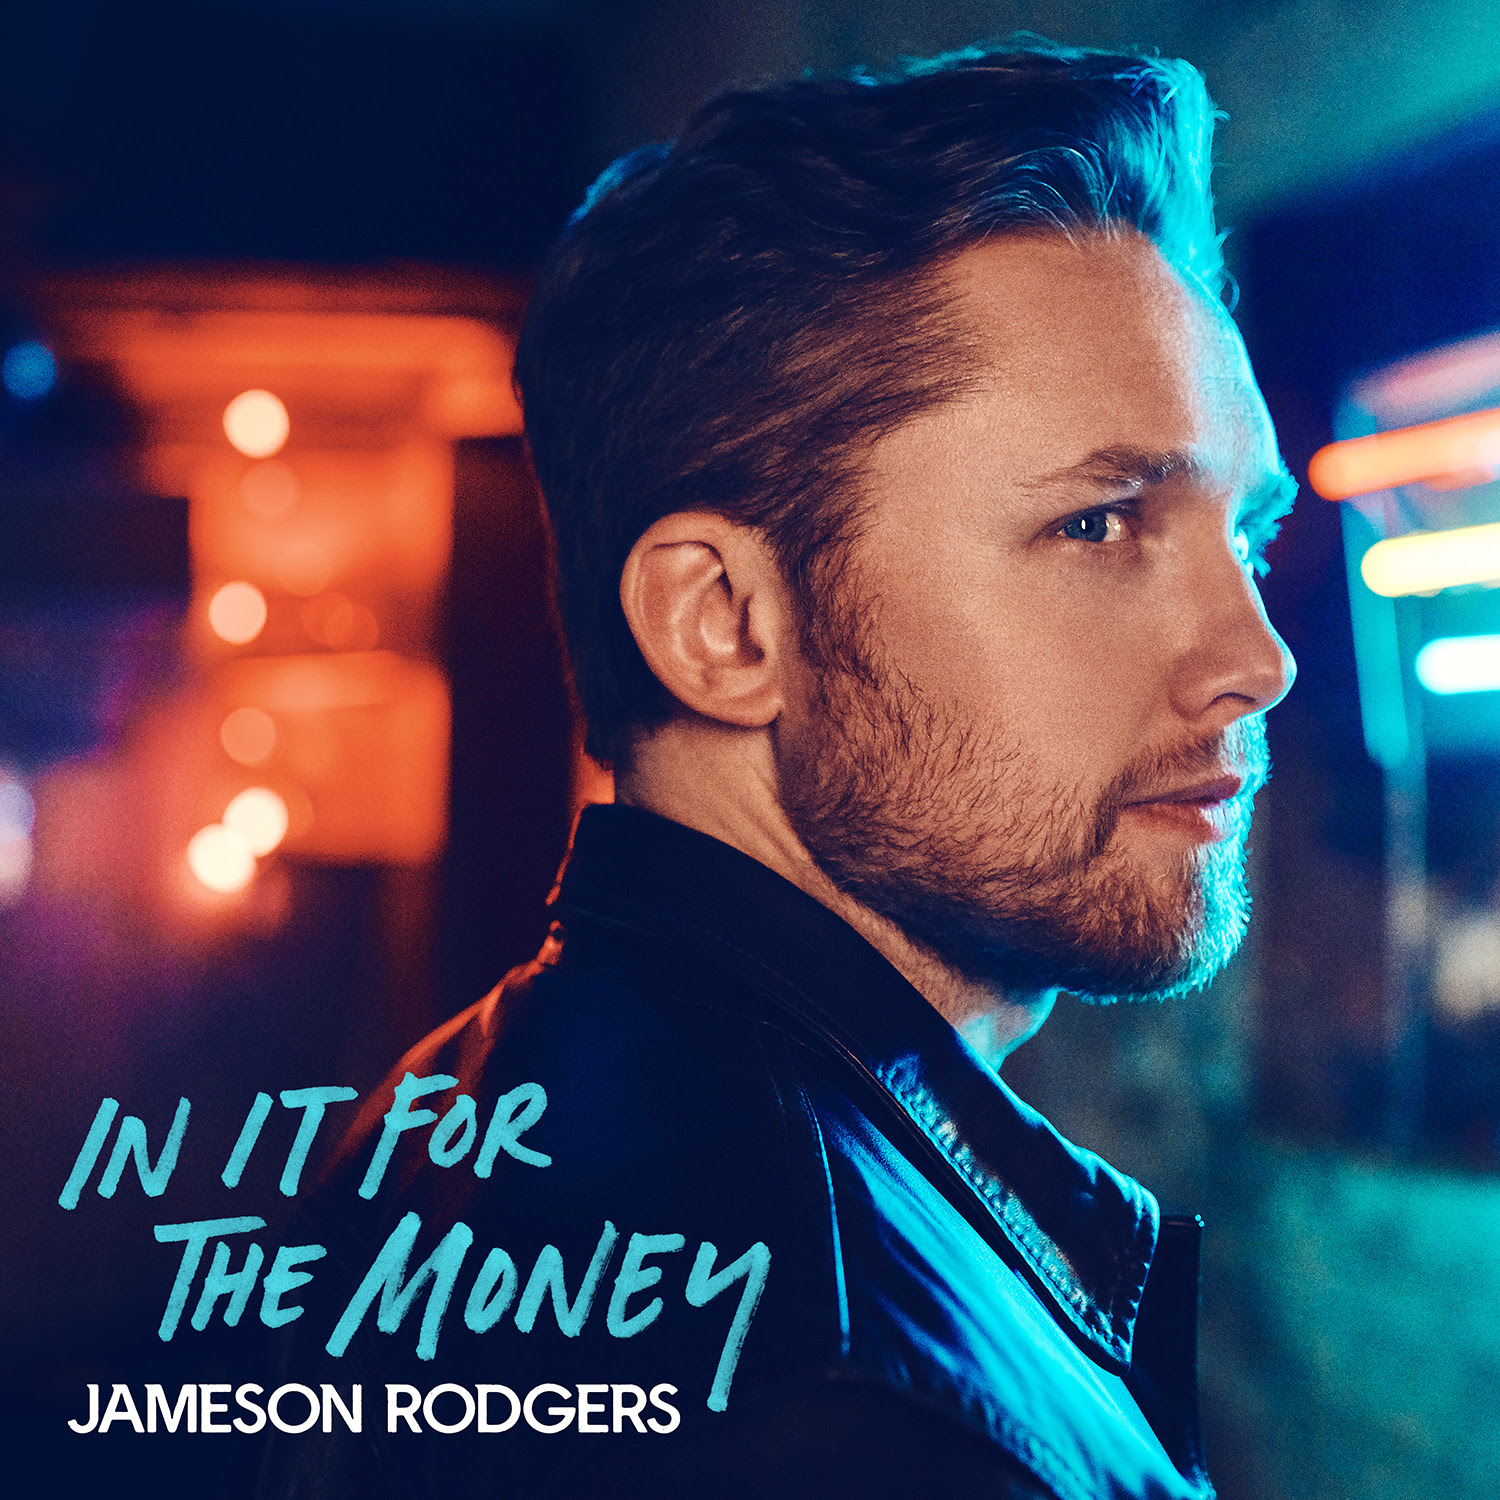 Jameson Rodgers' EP, 'In It For The Money' is due out April 23rd